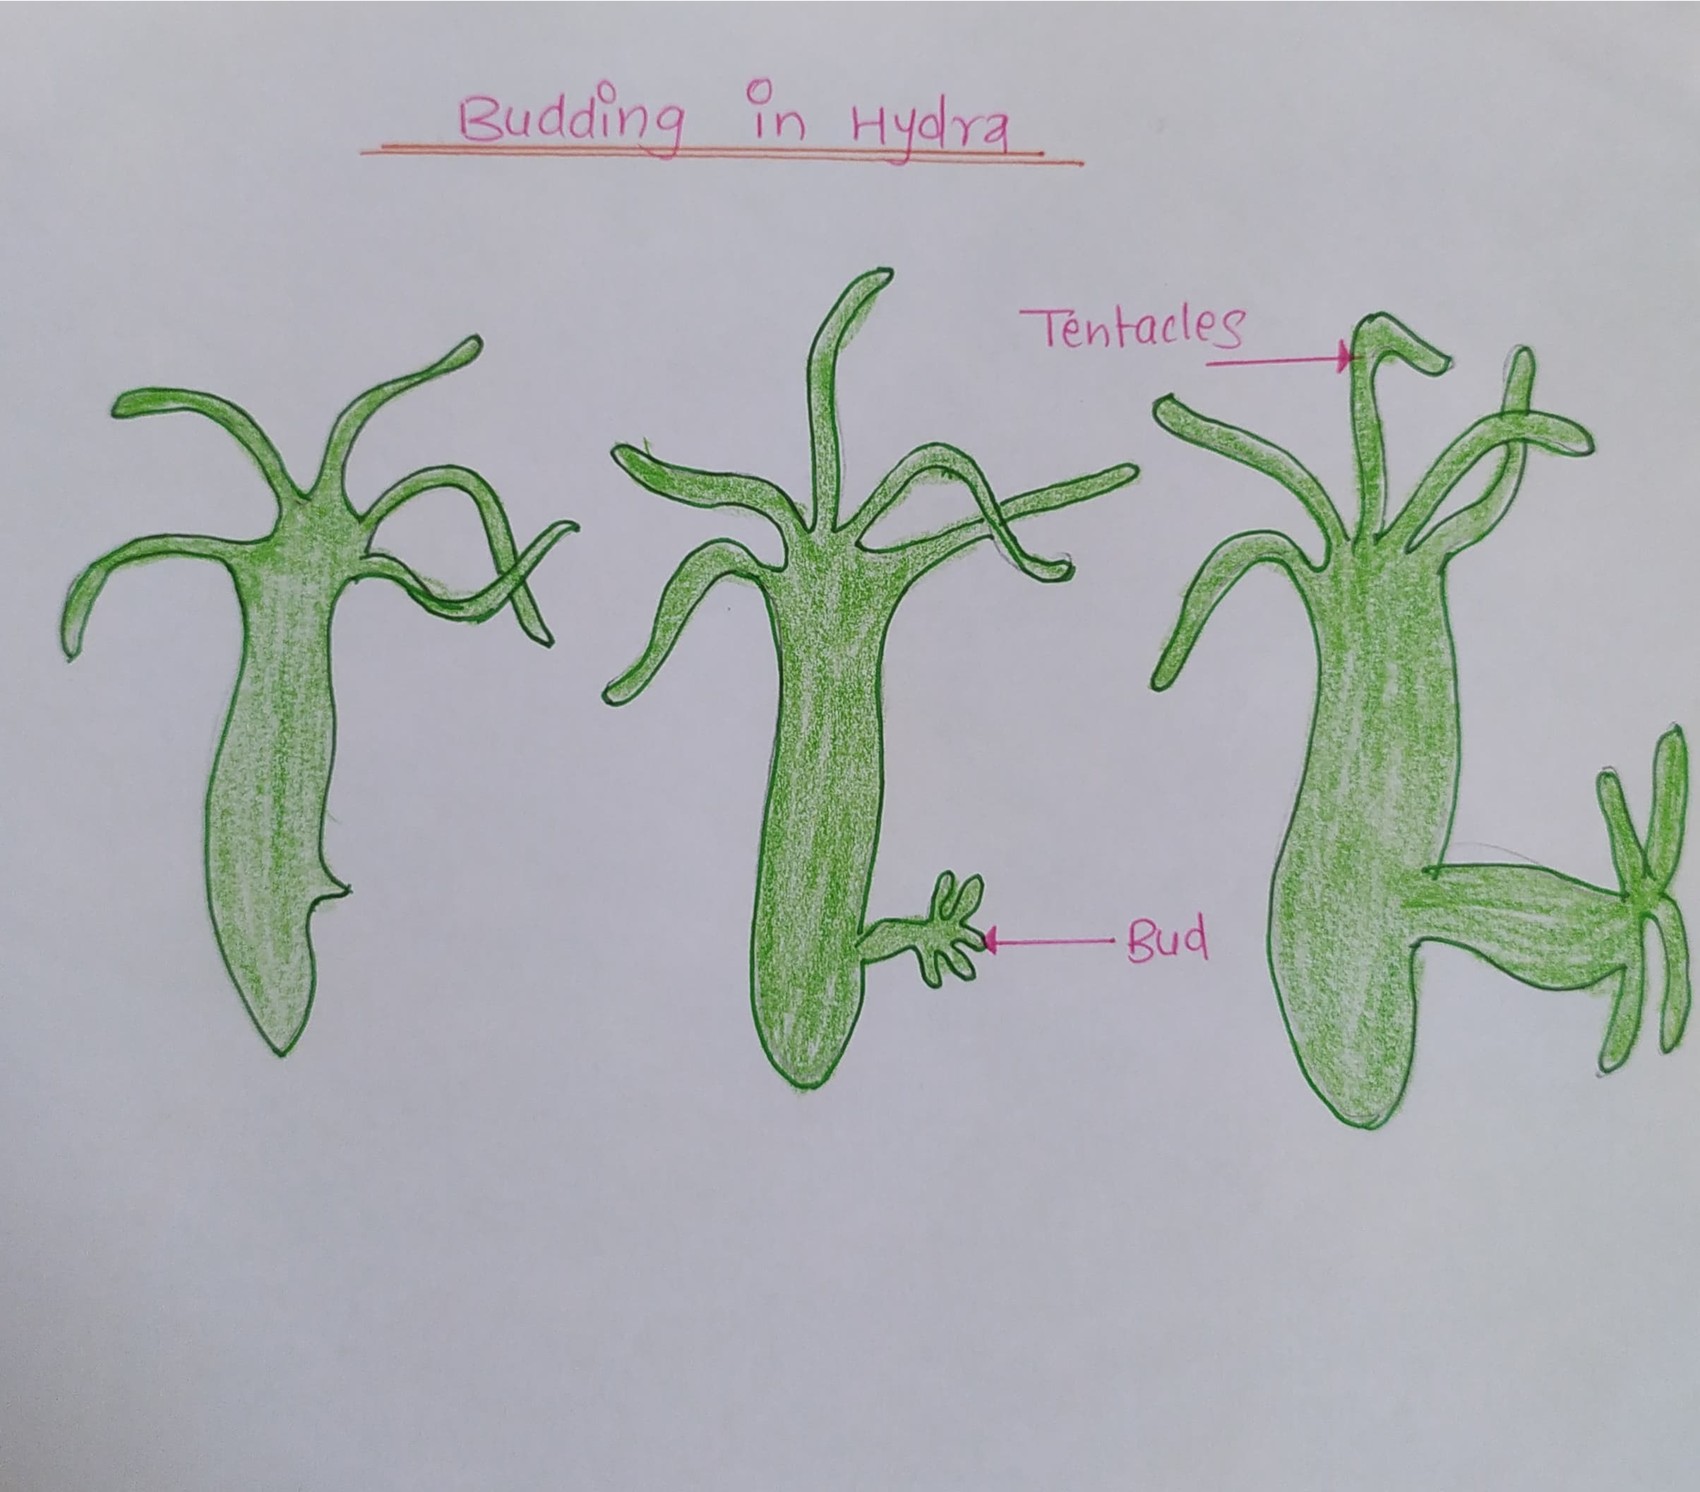 Labelled diagram of Budding in Hydra